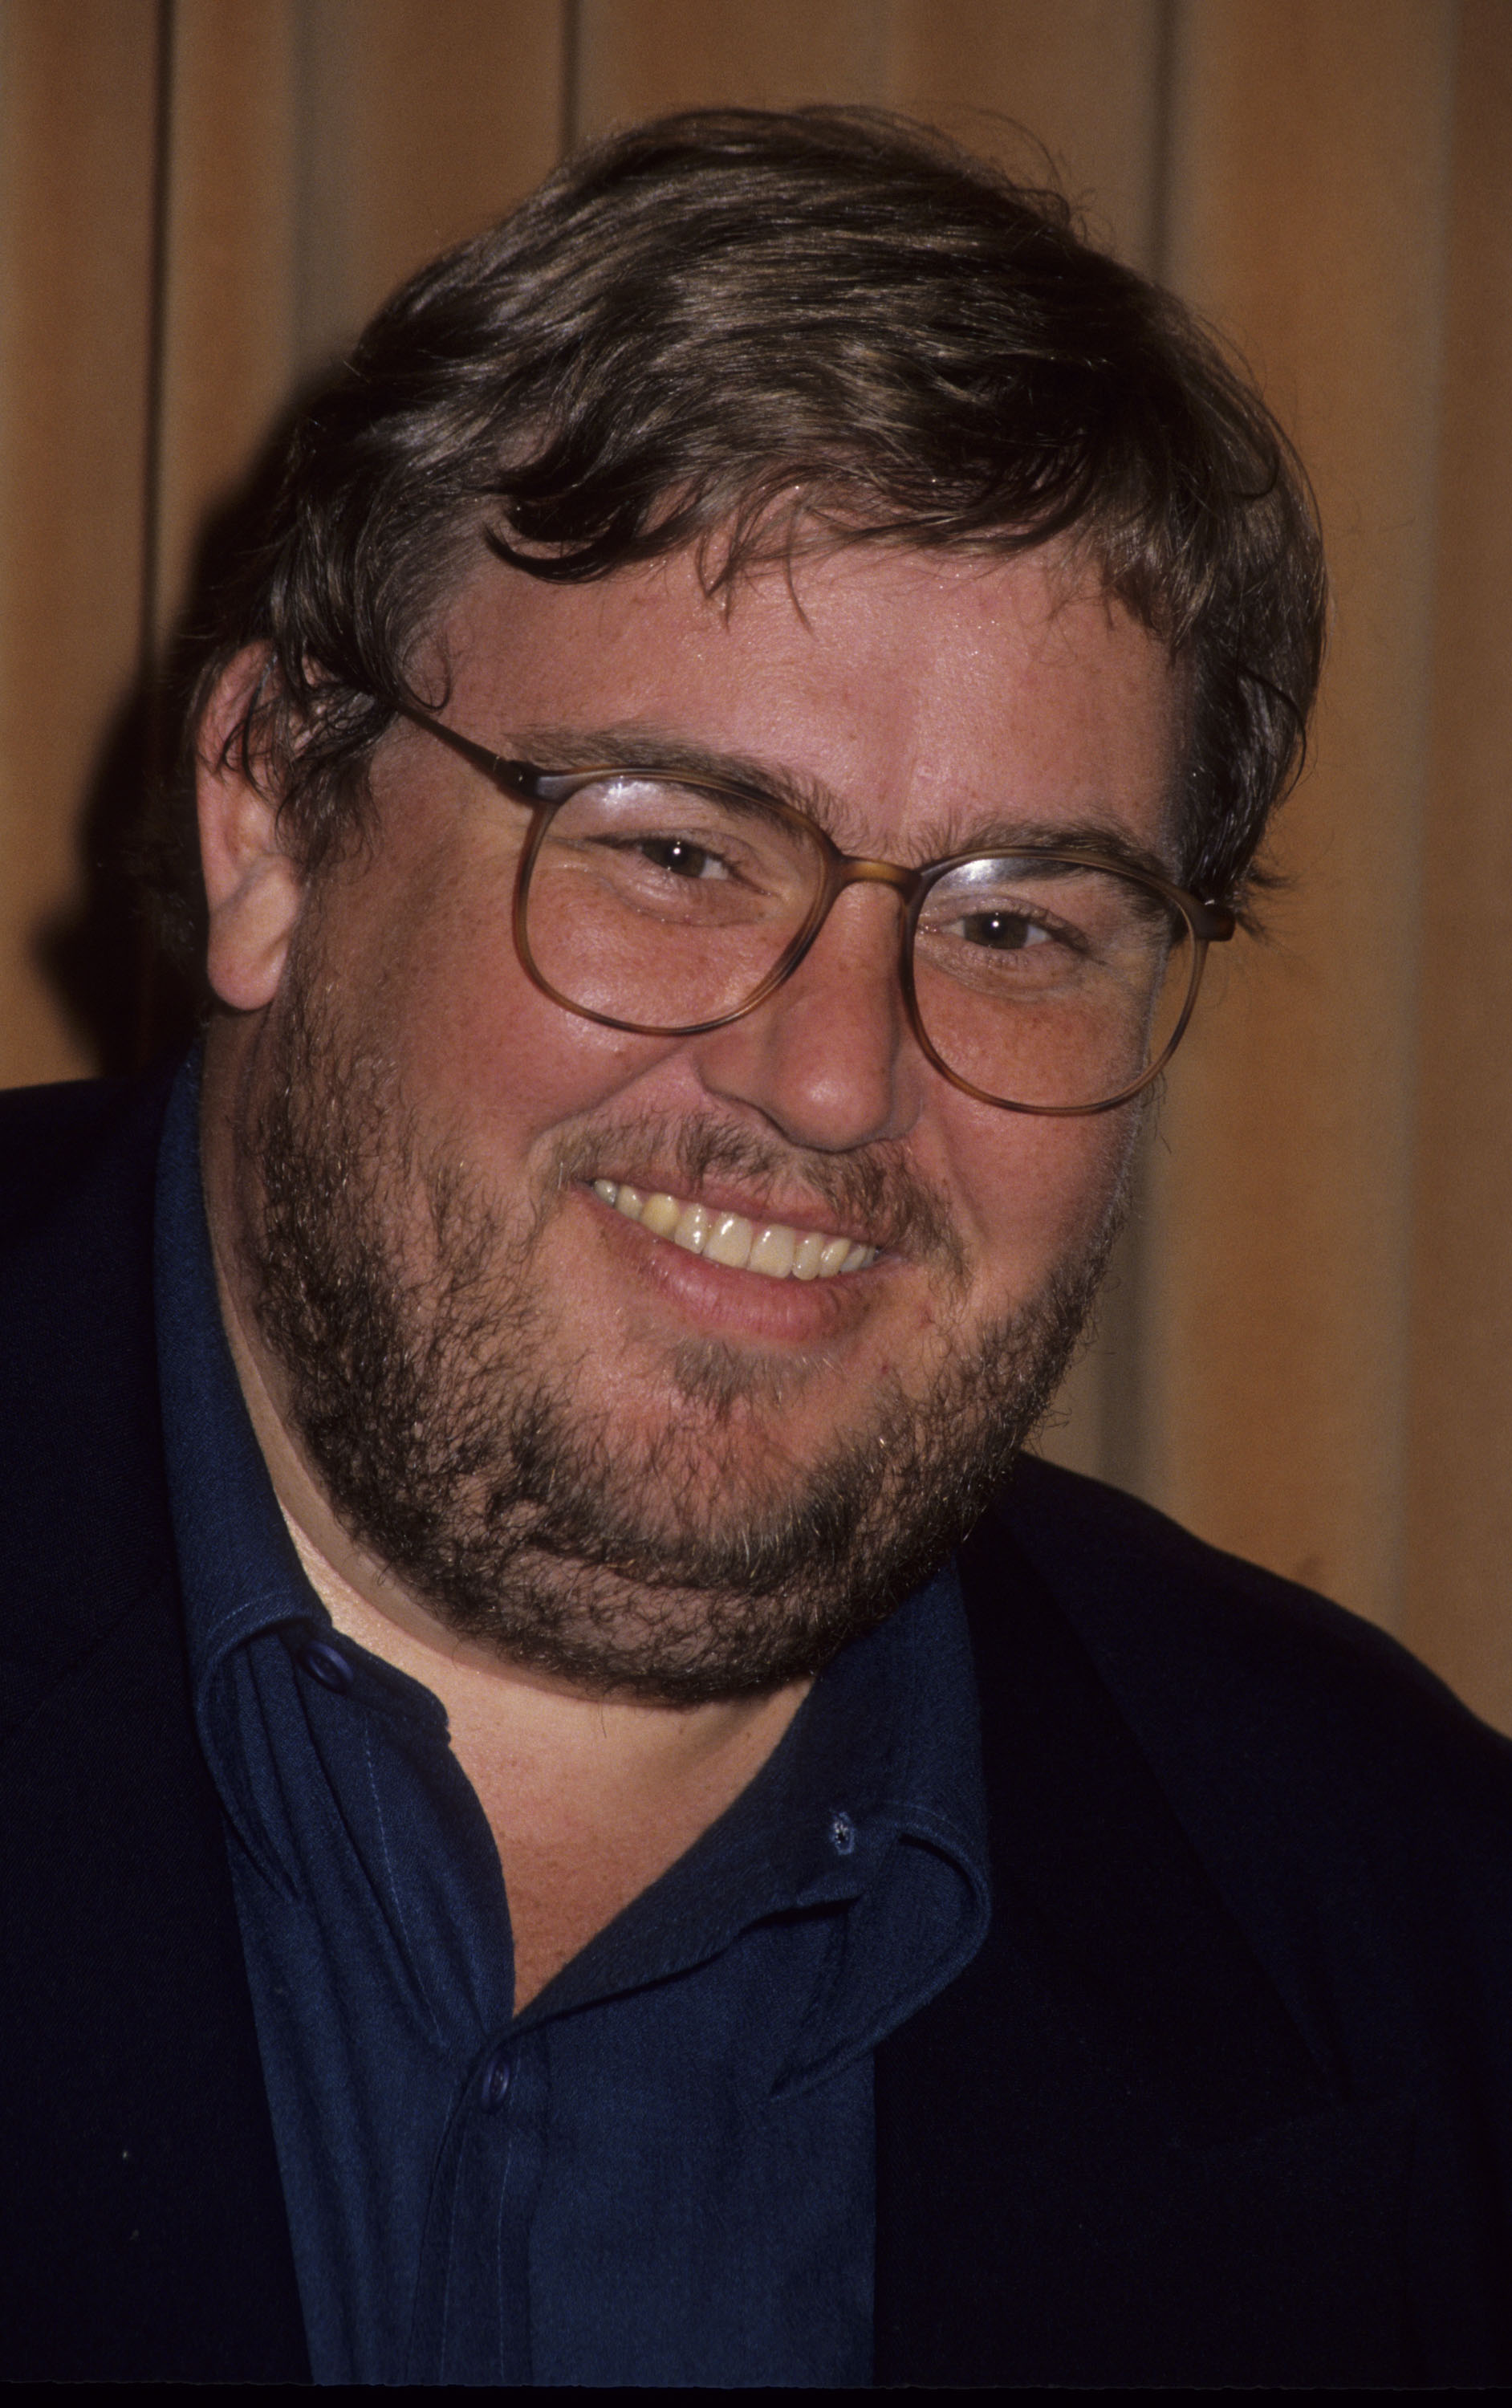 John Candy at the "ShoWest '91 Convention" on February 7, 1991, in Las Vegas. | Source: Getty Images